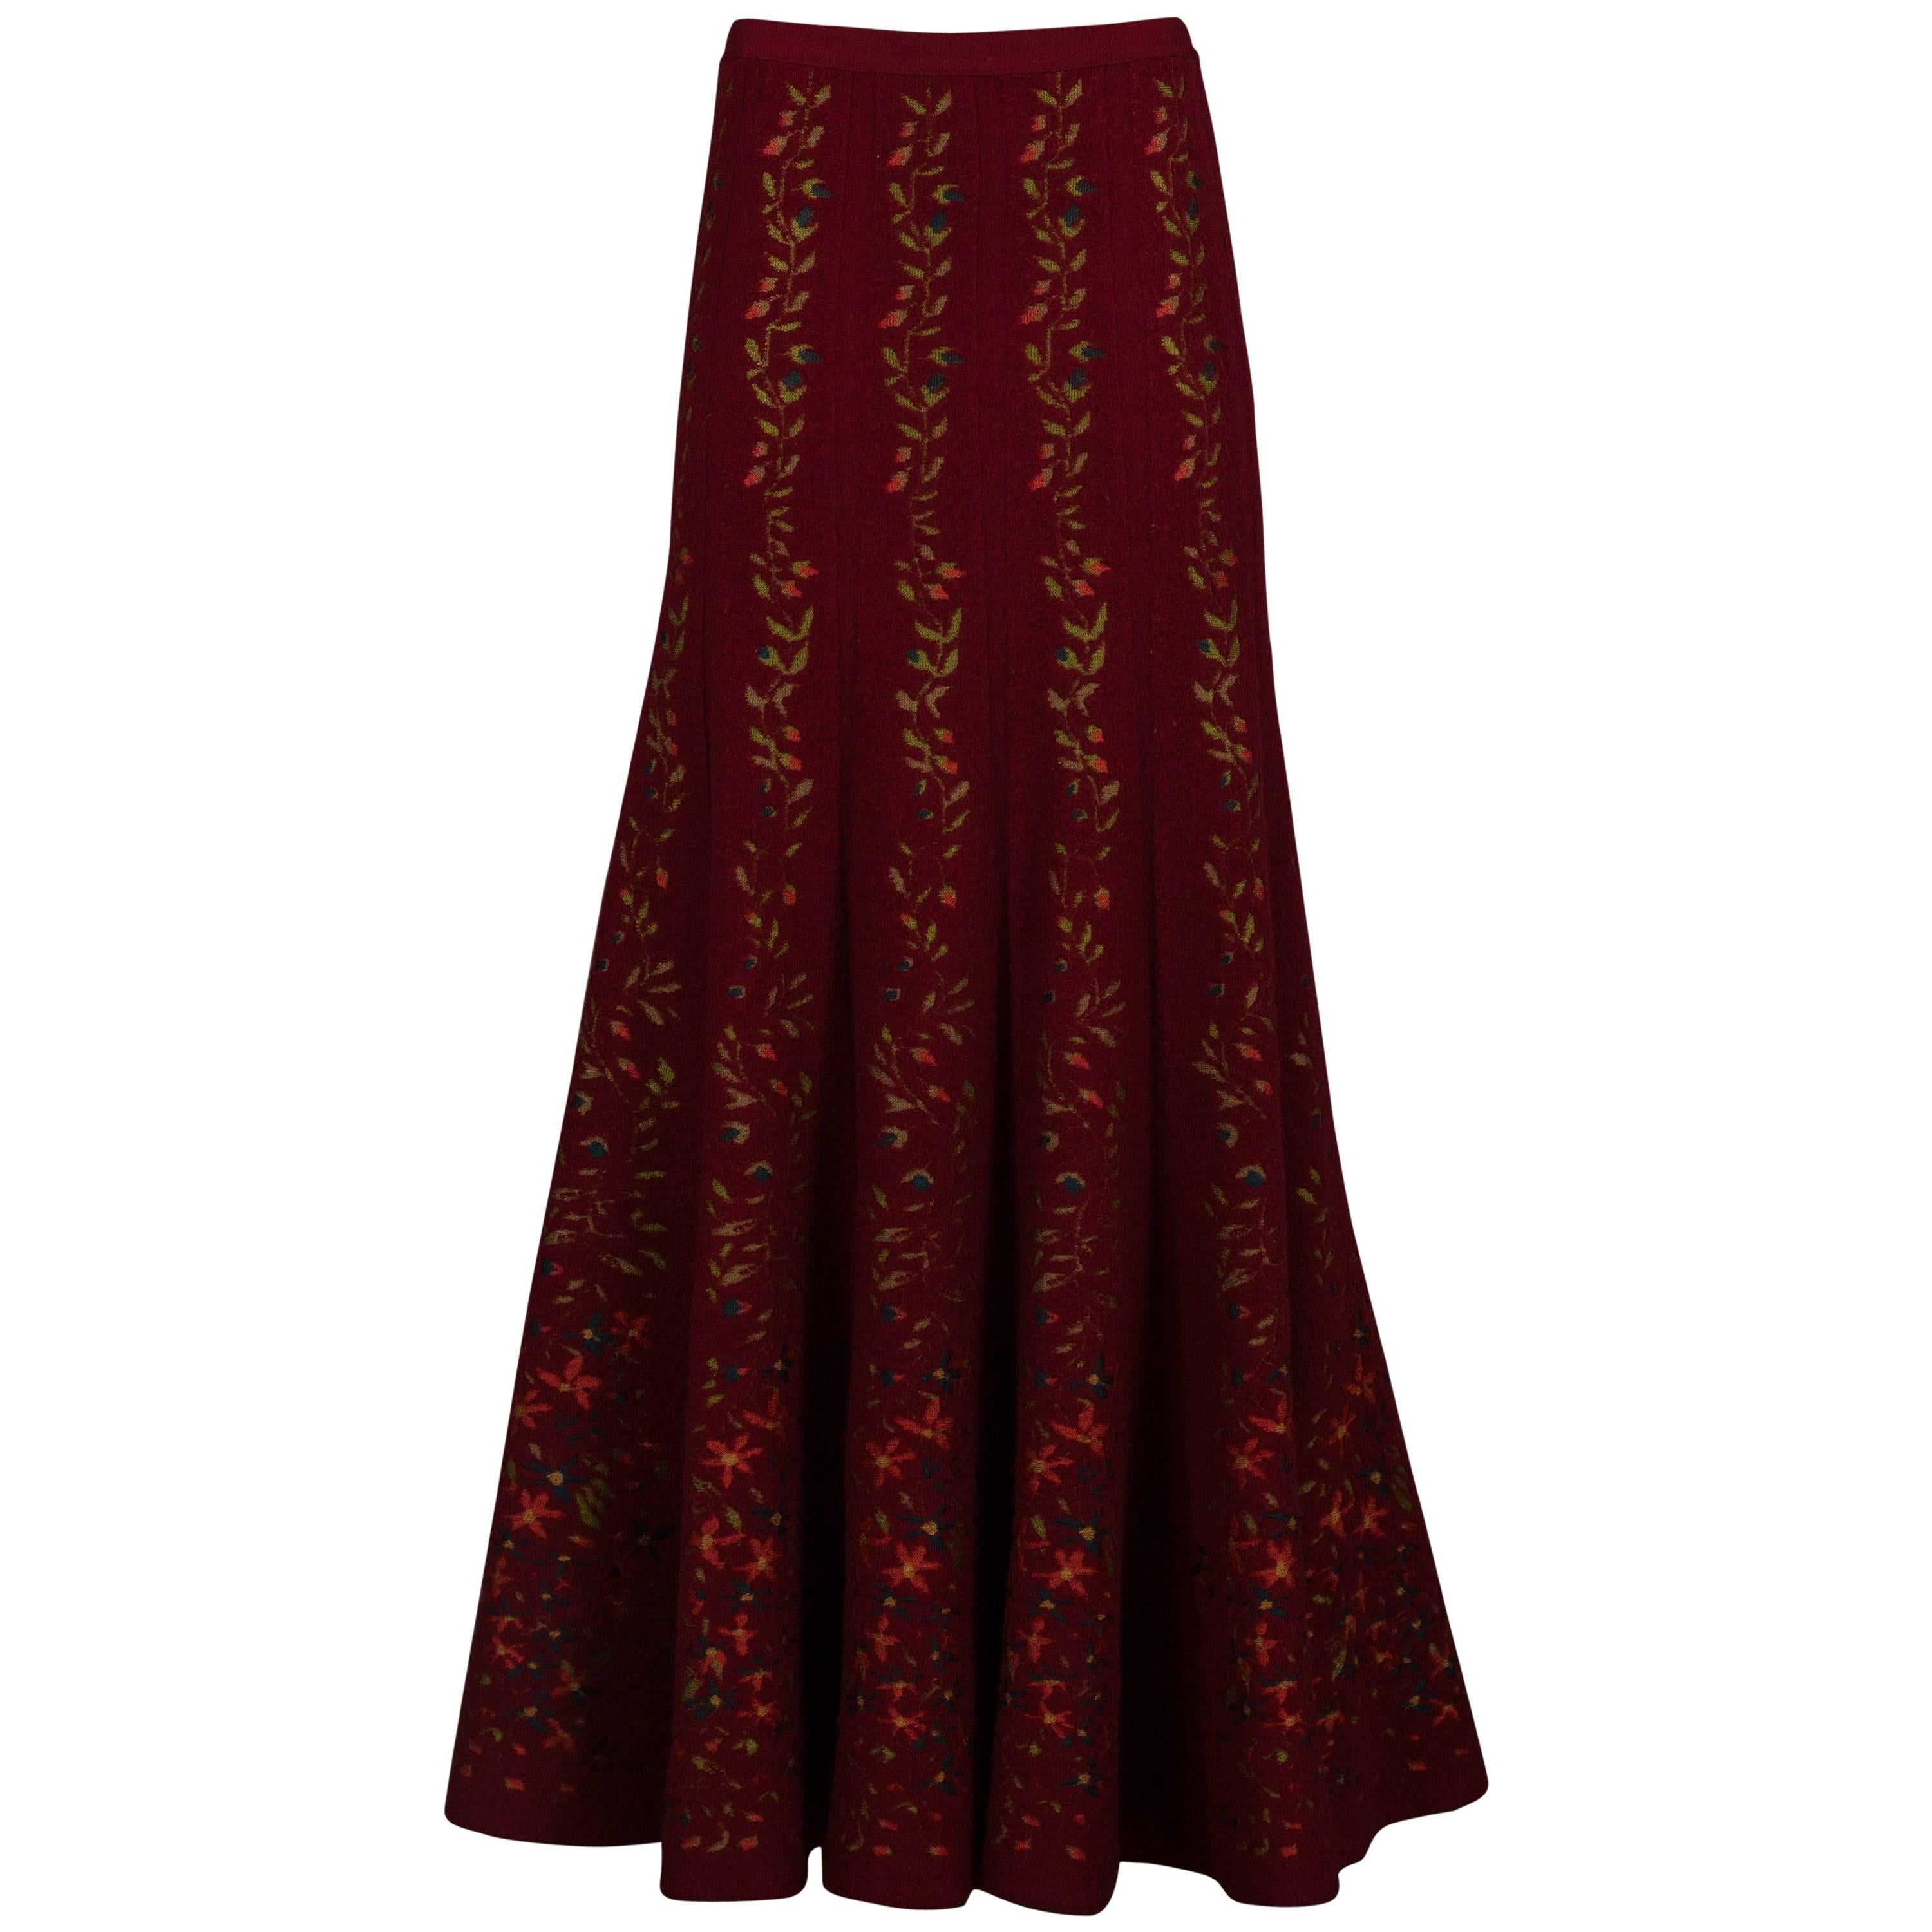 Alaia rouge embroidered knitted skirt, circa 1999